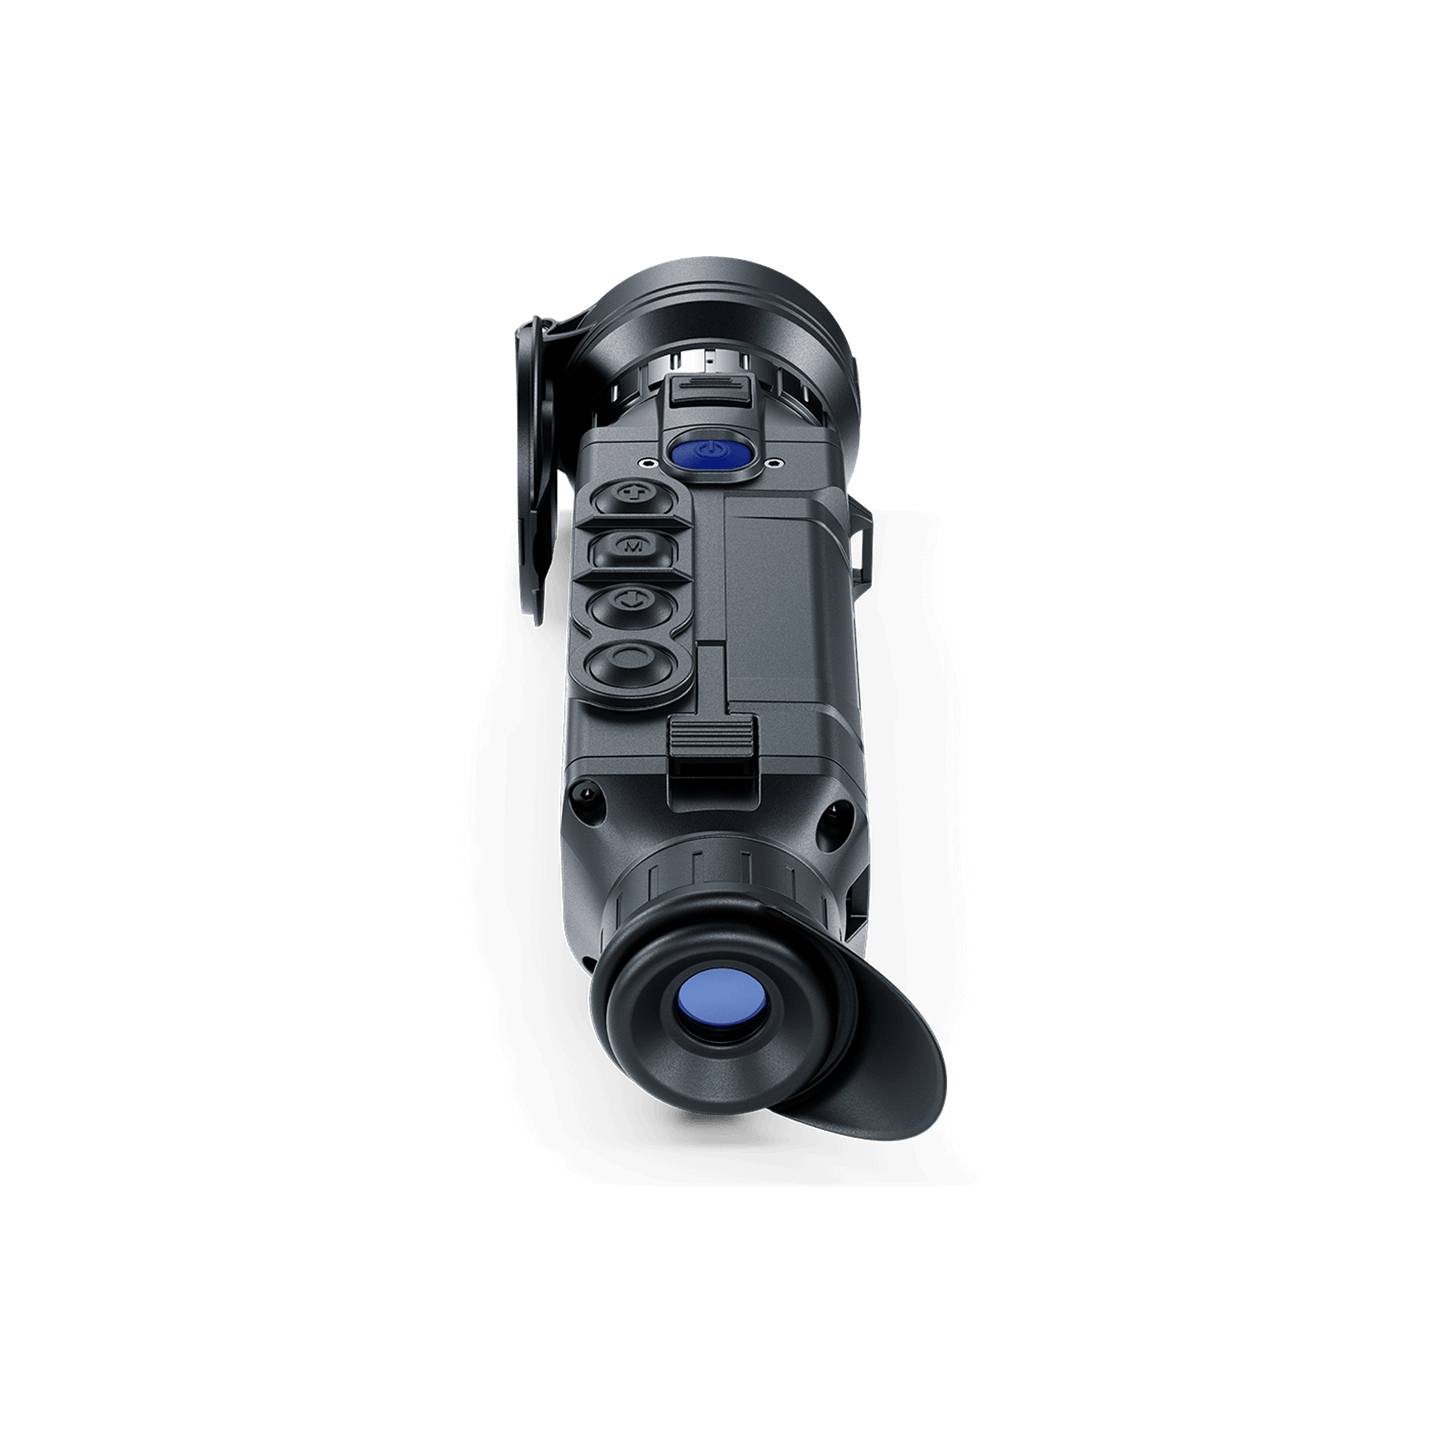 Rear View Pulsar Helion 2 XP50 Thermal Monocular - Cape Thermal